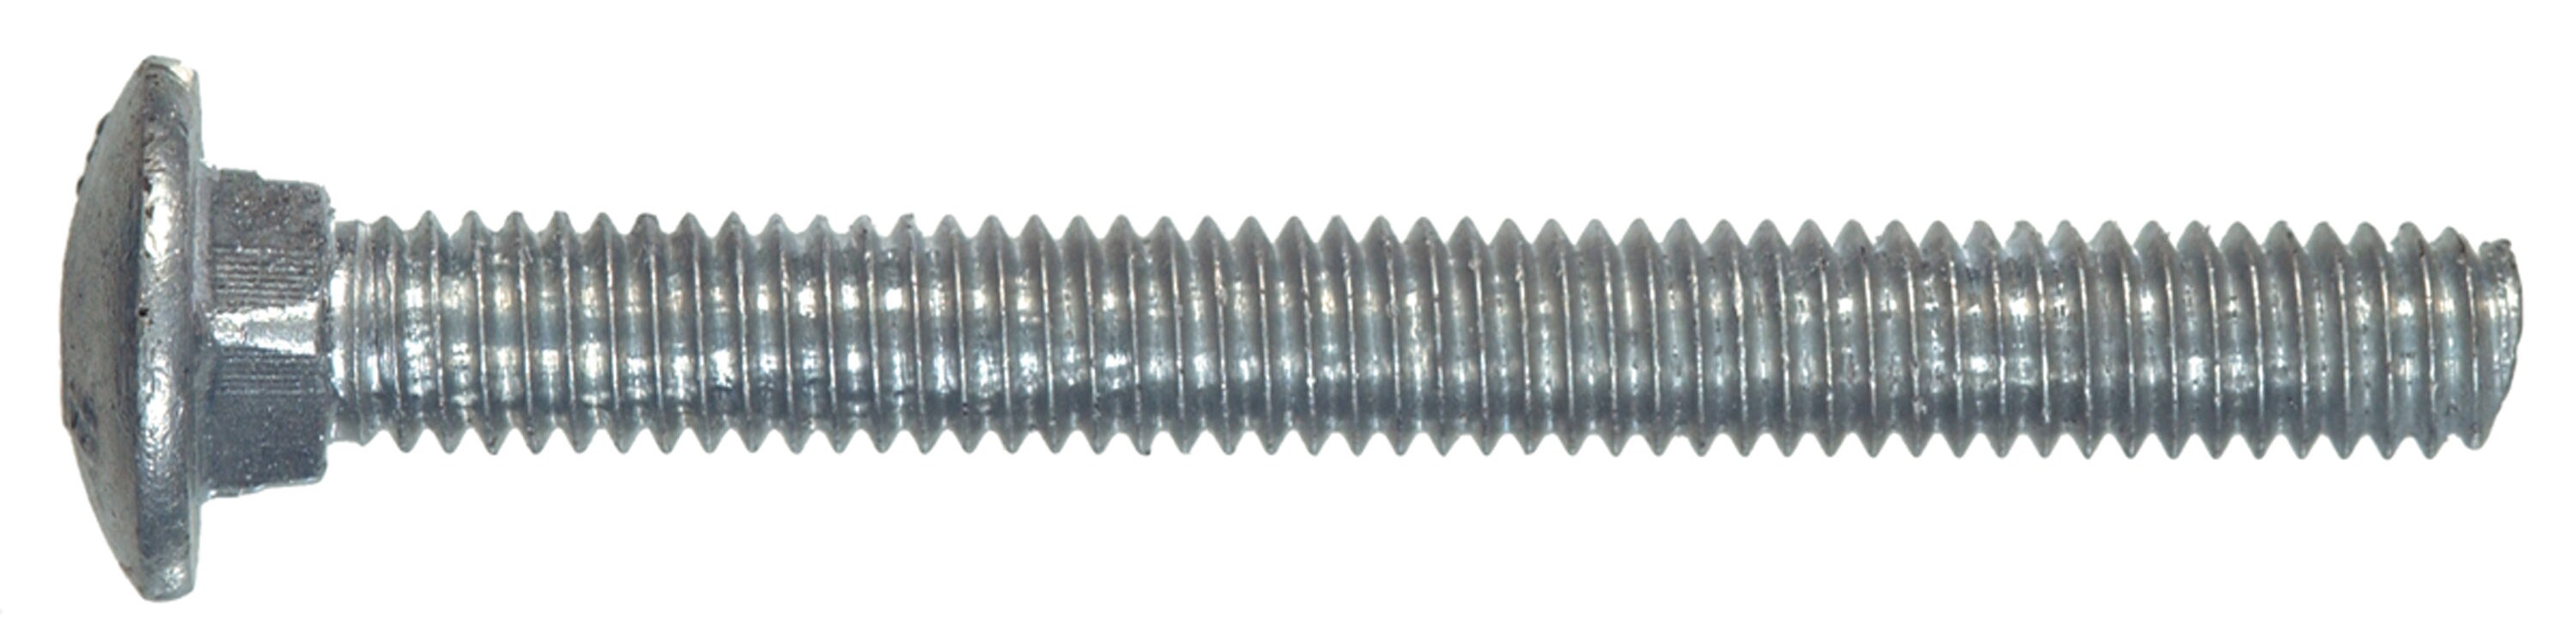 3/8x5" Carriage Bolts Hot Dip Galvanized 100 